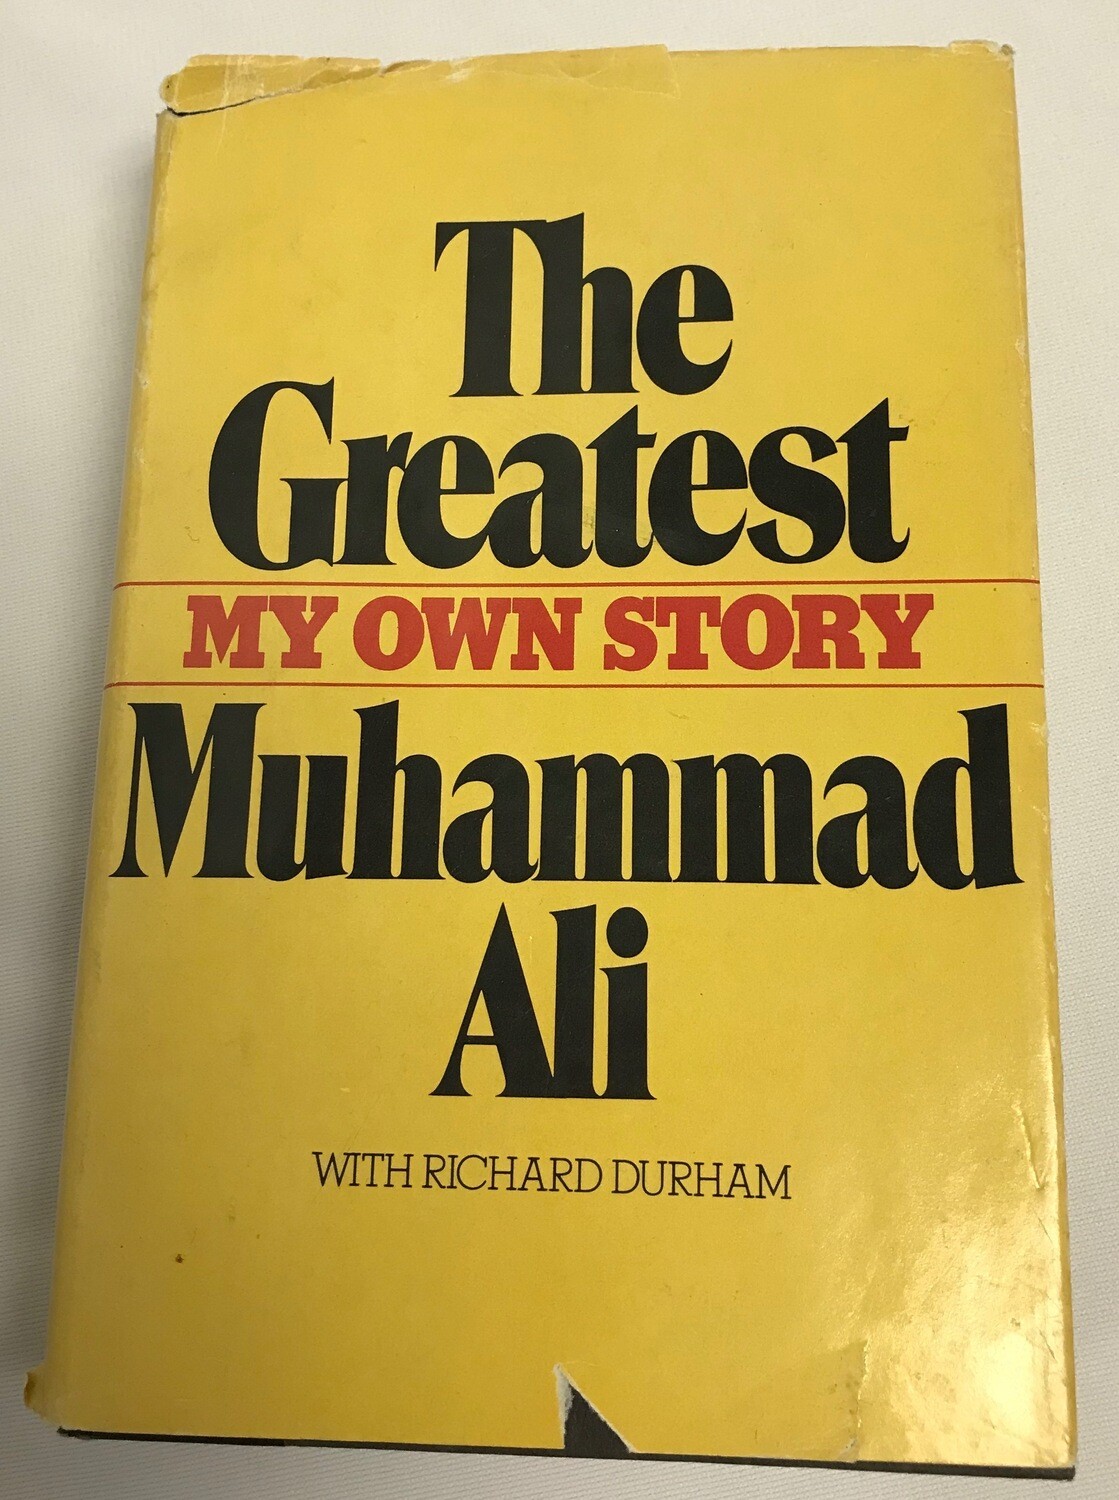 The Greatest: My Own Story
by Muhammad Ali